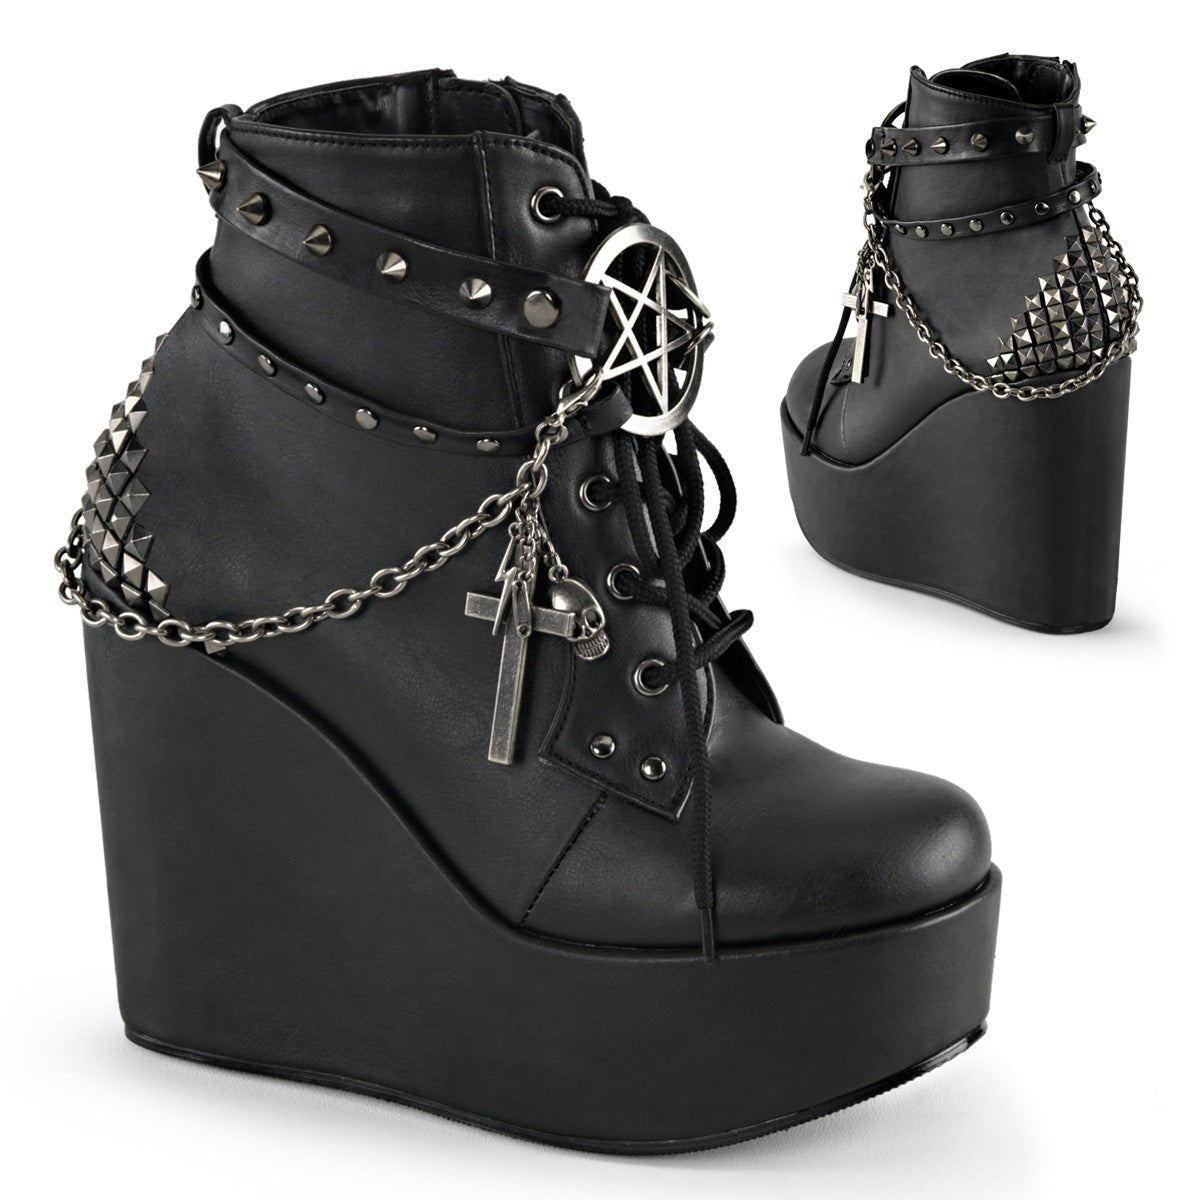 Womens Gothic Boots Buy Online from Alternative Footwear